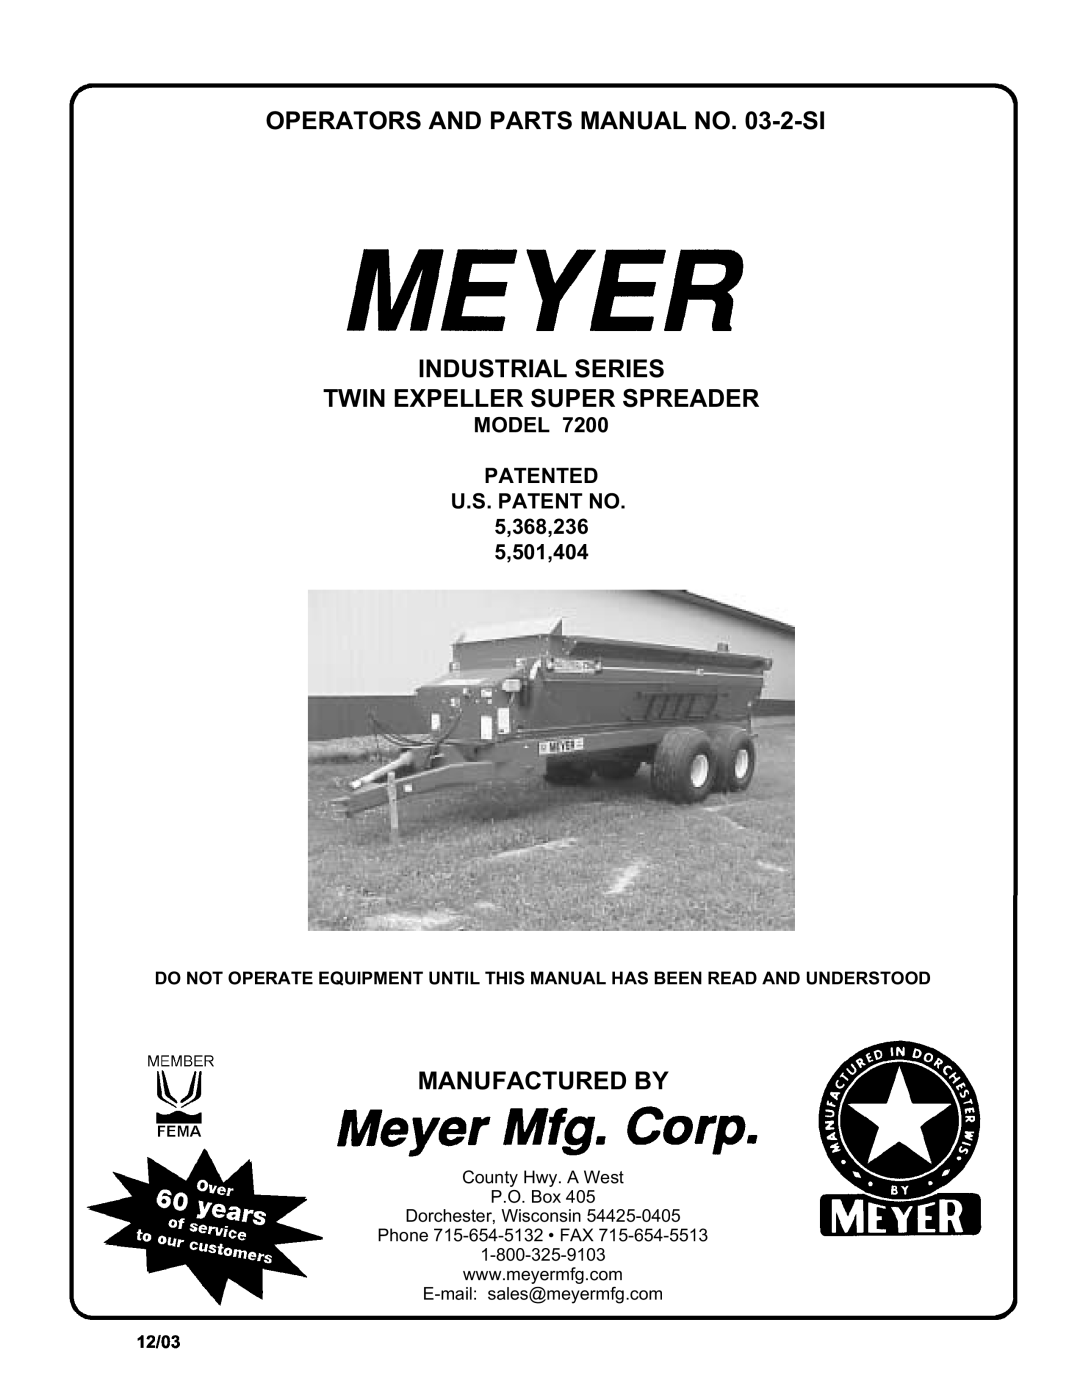 Meyer 7200 manual OPERATORS AND PARTS MANUAL NO. 03-2-SI, Industrial Series Twin Expeller Super Spreader, Manufactured By 